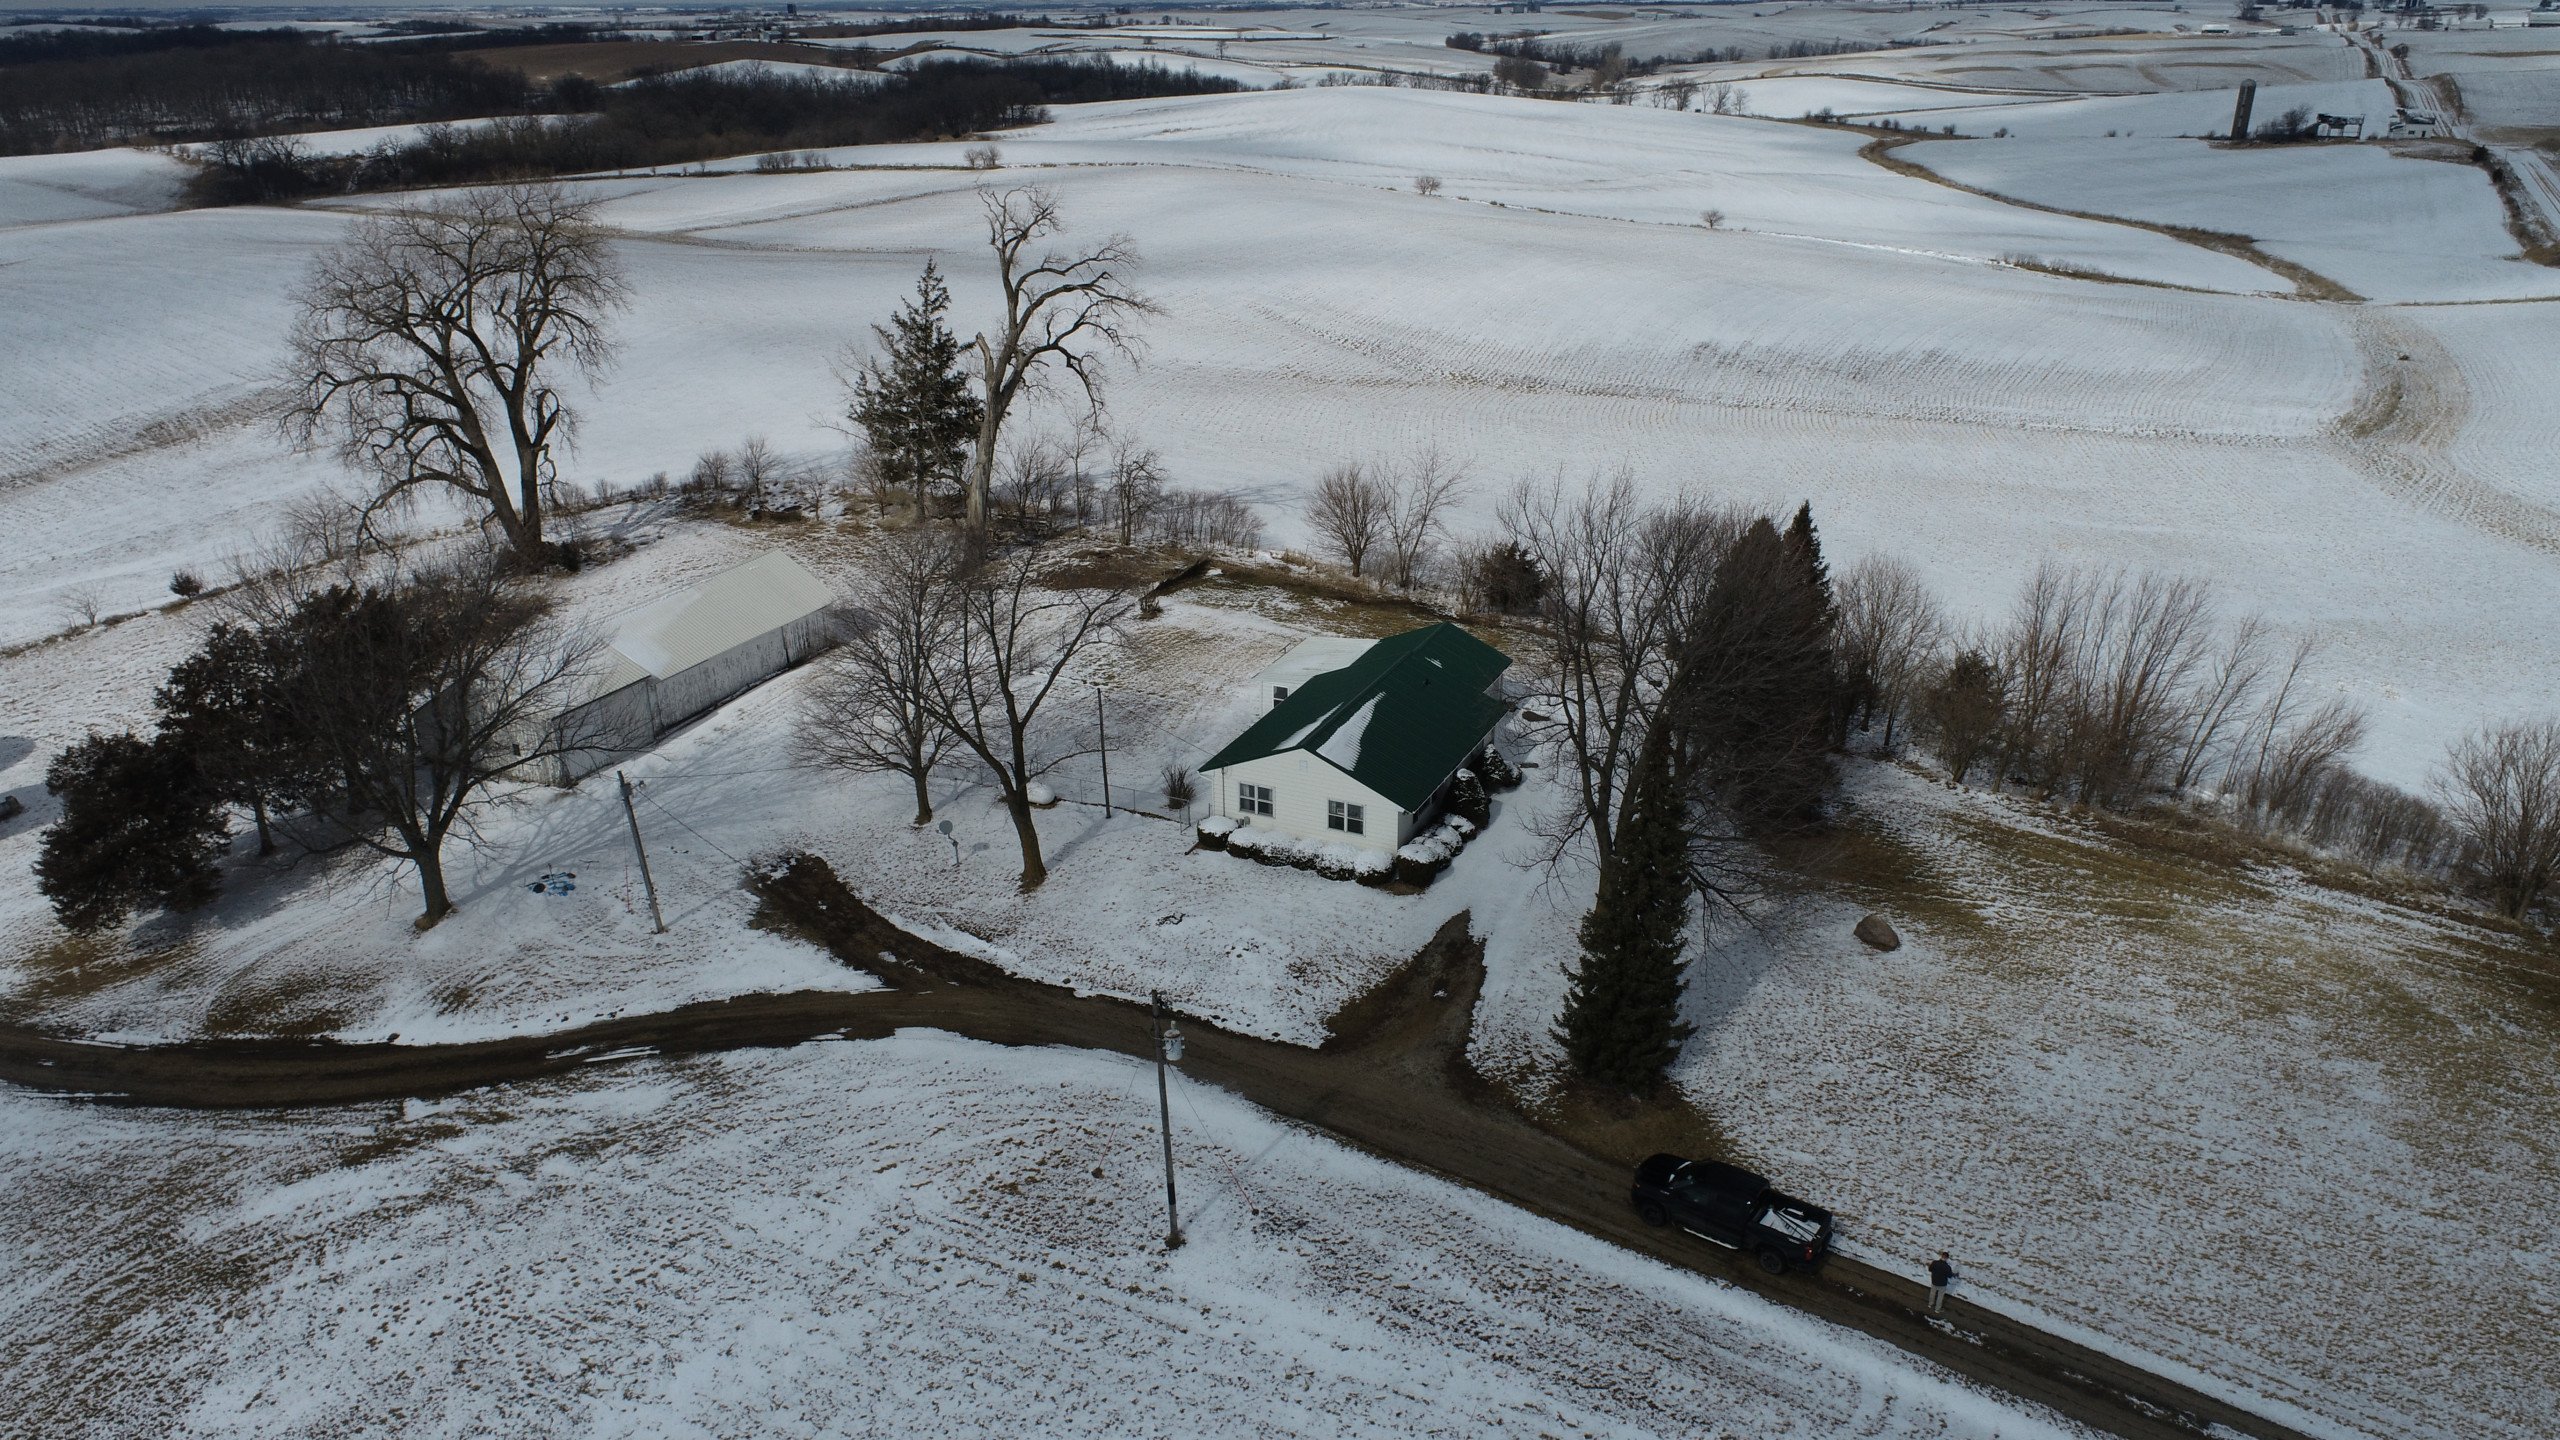 residential-clinton-county-iowa-6-acres-listing-number-16070-DJI_0210-1.jpg